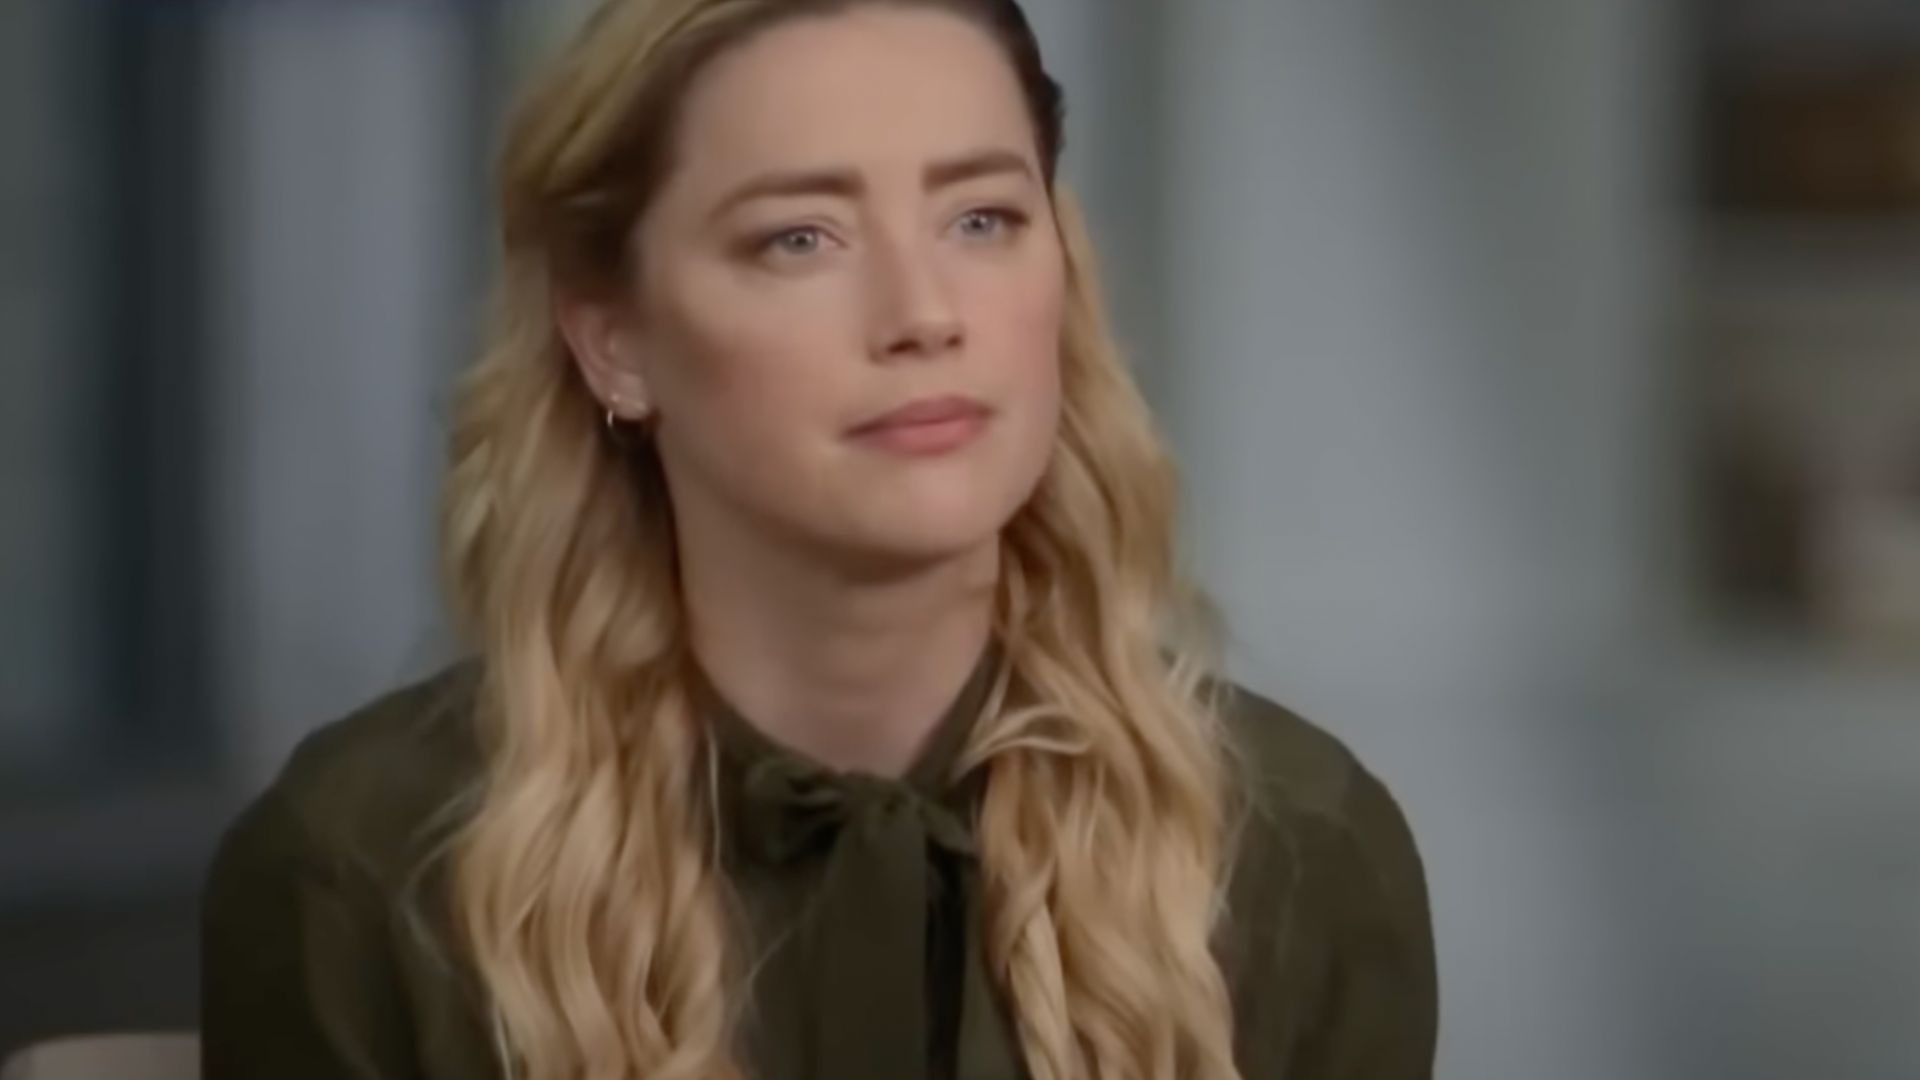 Amber Heard is the most hated person in the world as the online female thread flourishes.